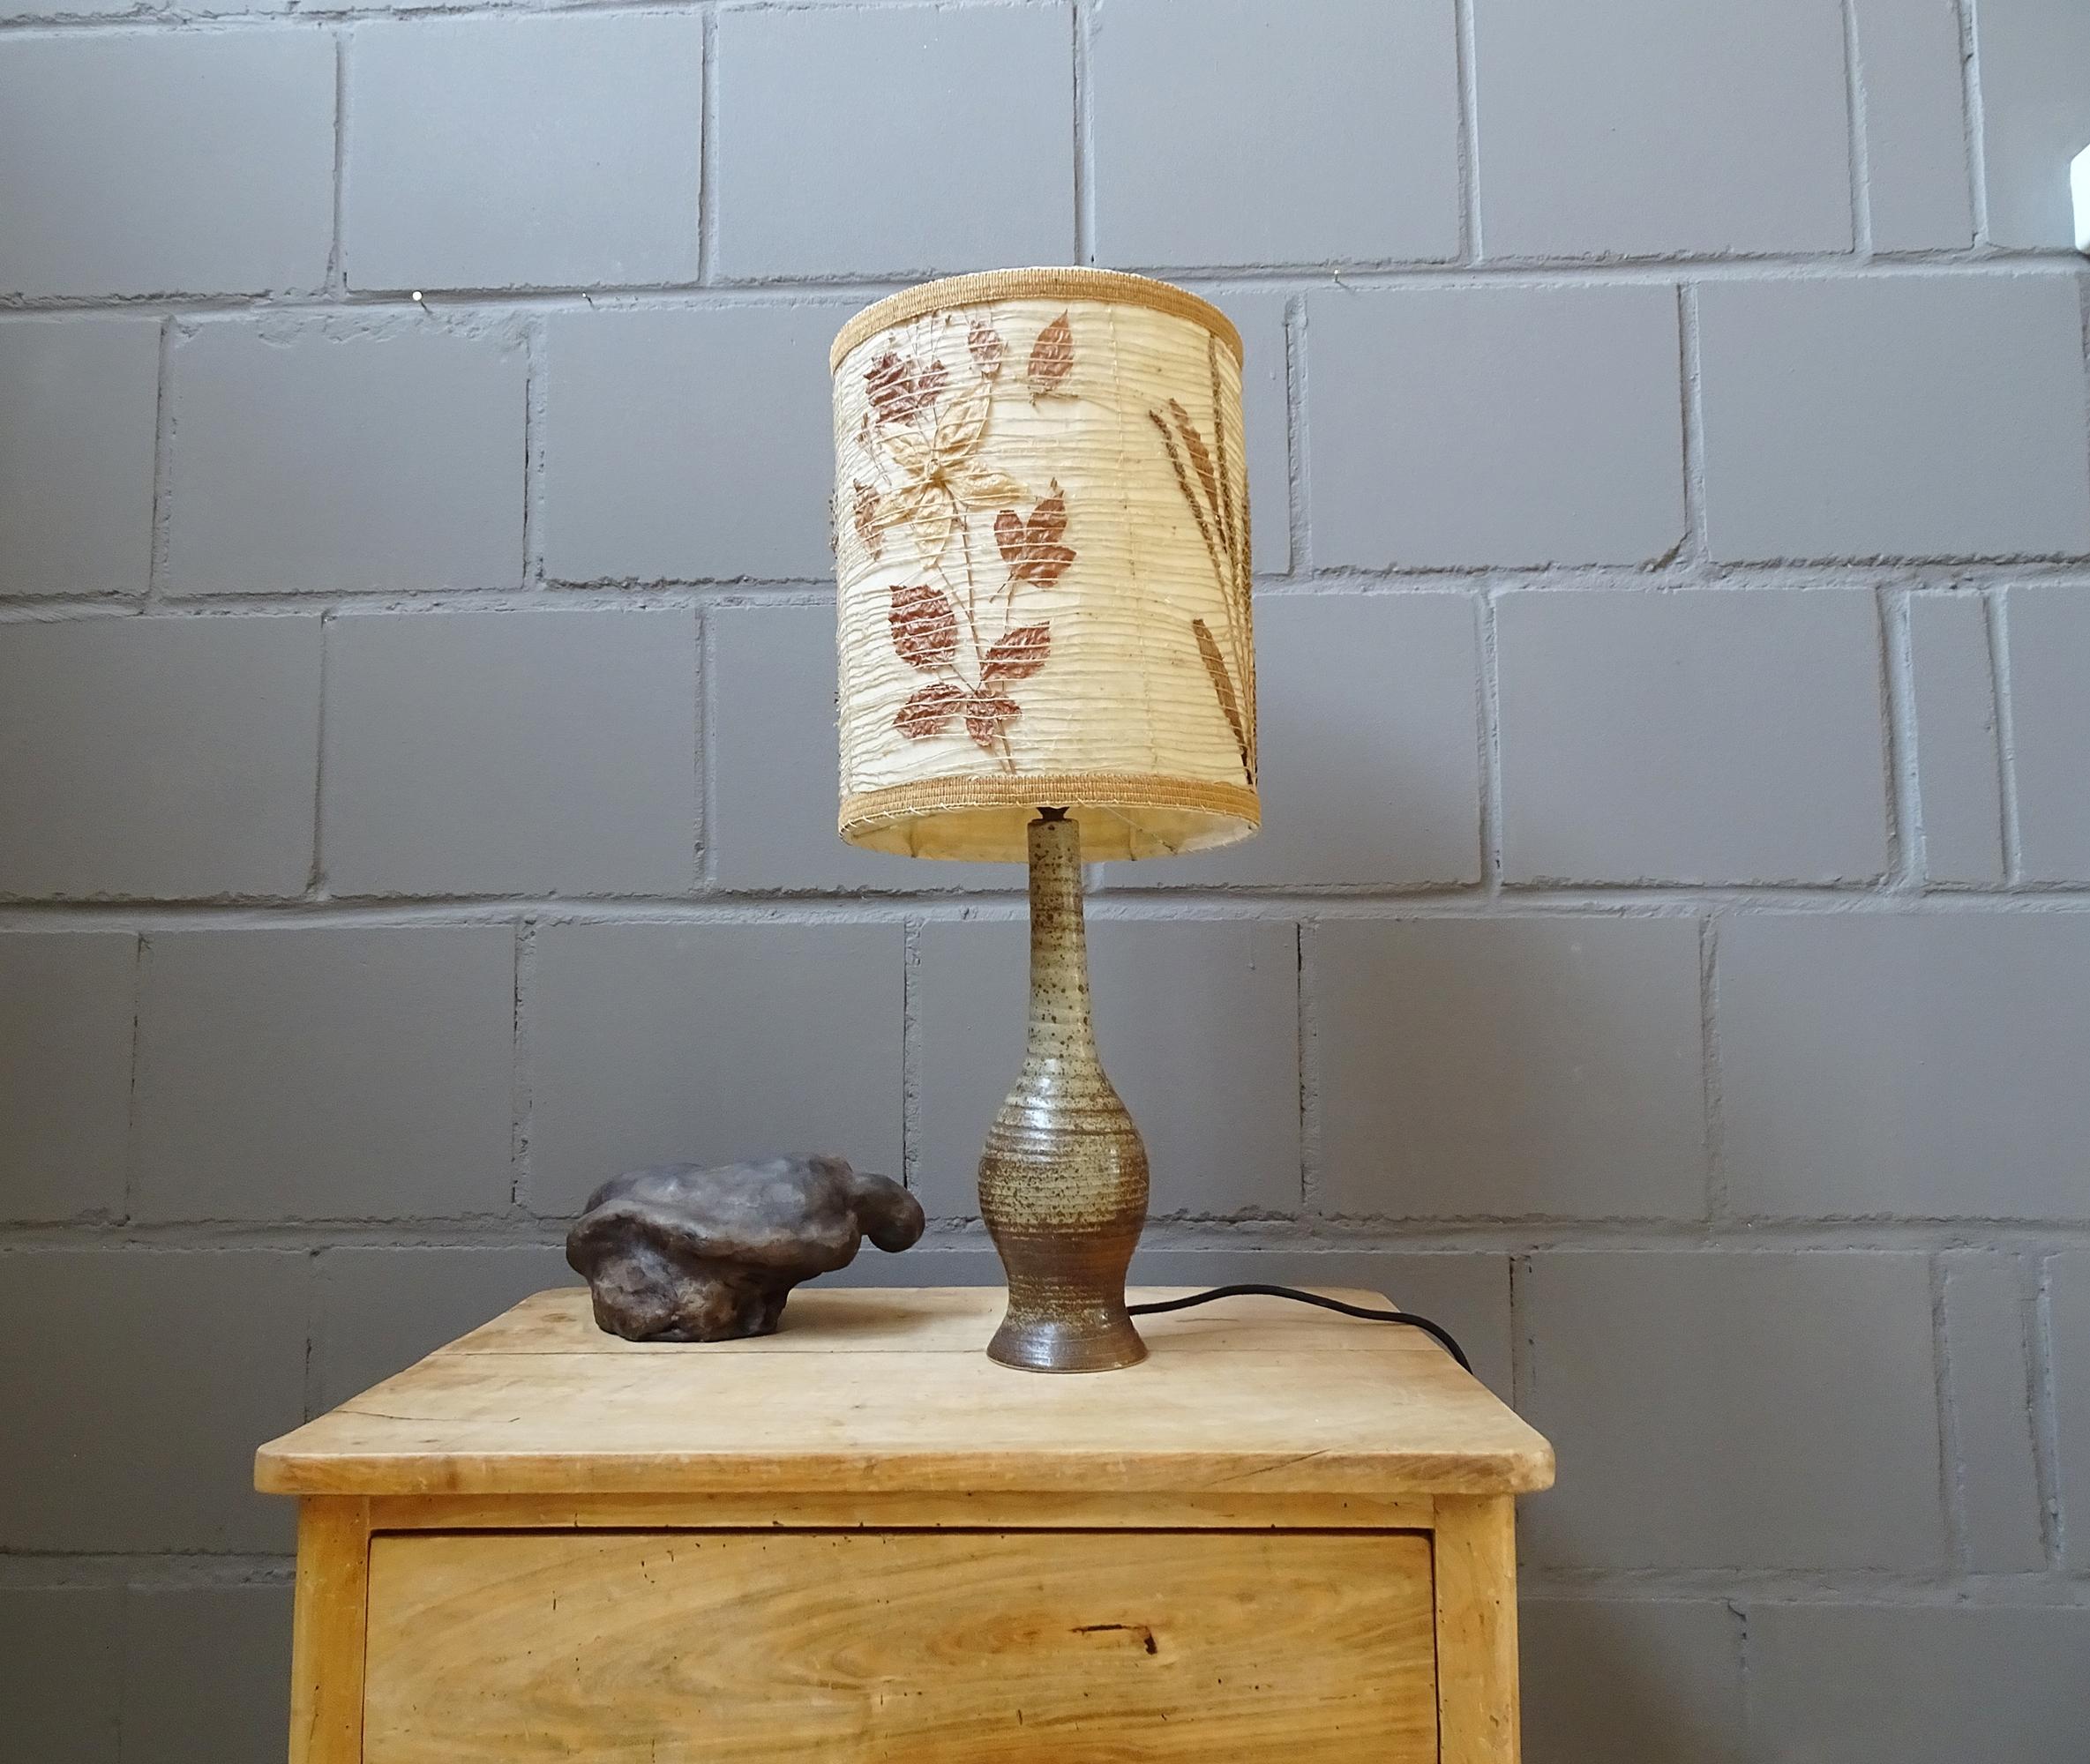 French Midcentury Ceramic Table Lamp by Jean Tessier Vallauris, France, 1960s For Sale